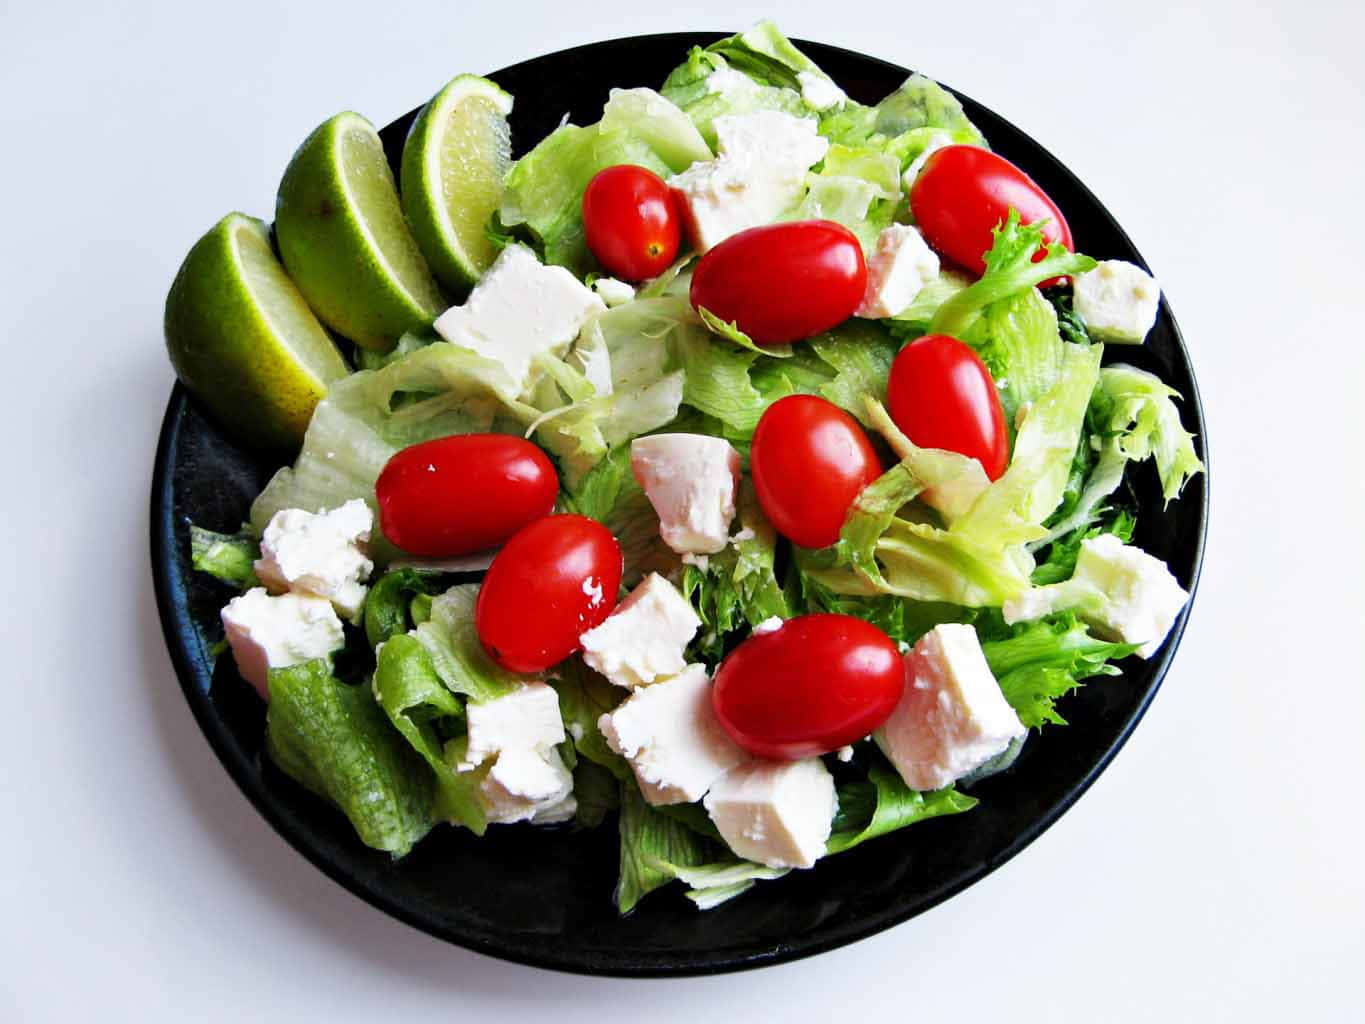 Fresh, Colorful Salad on a Light Background